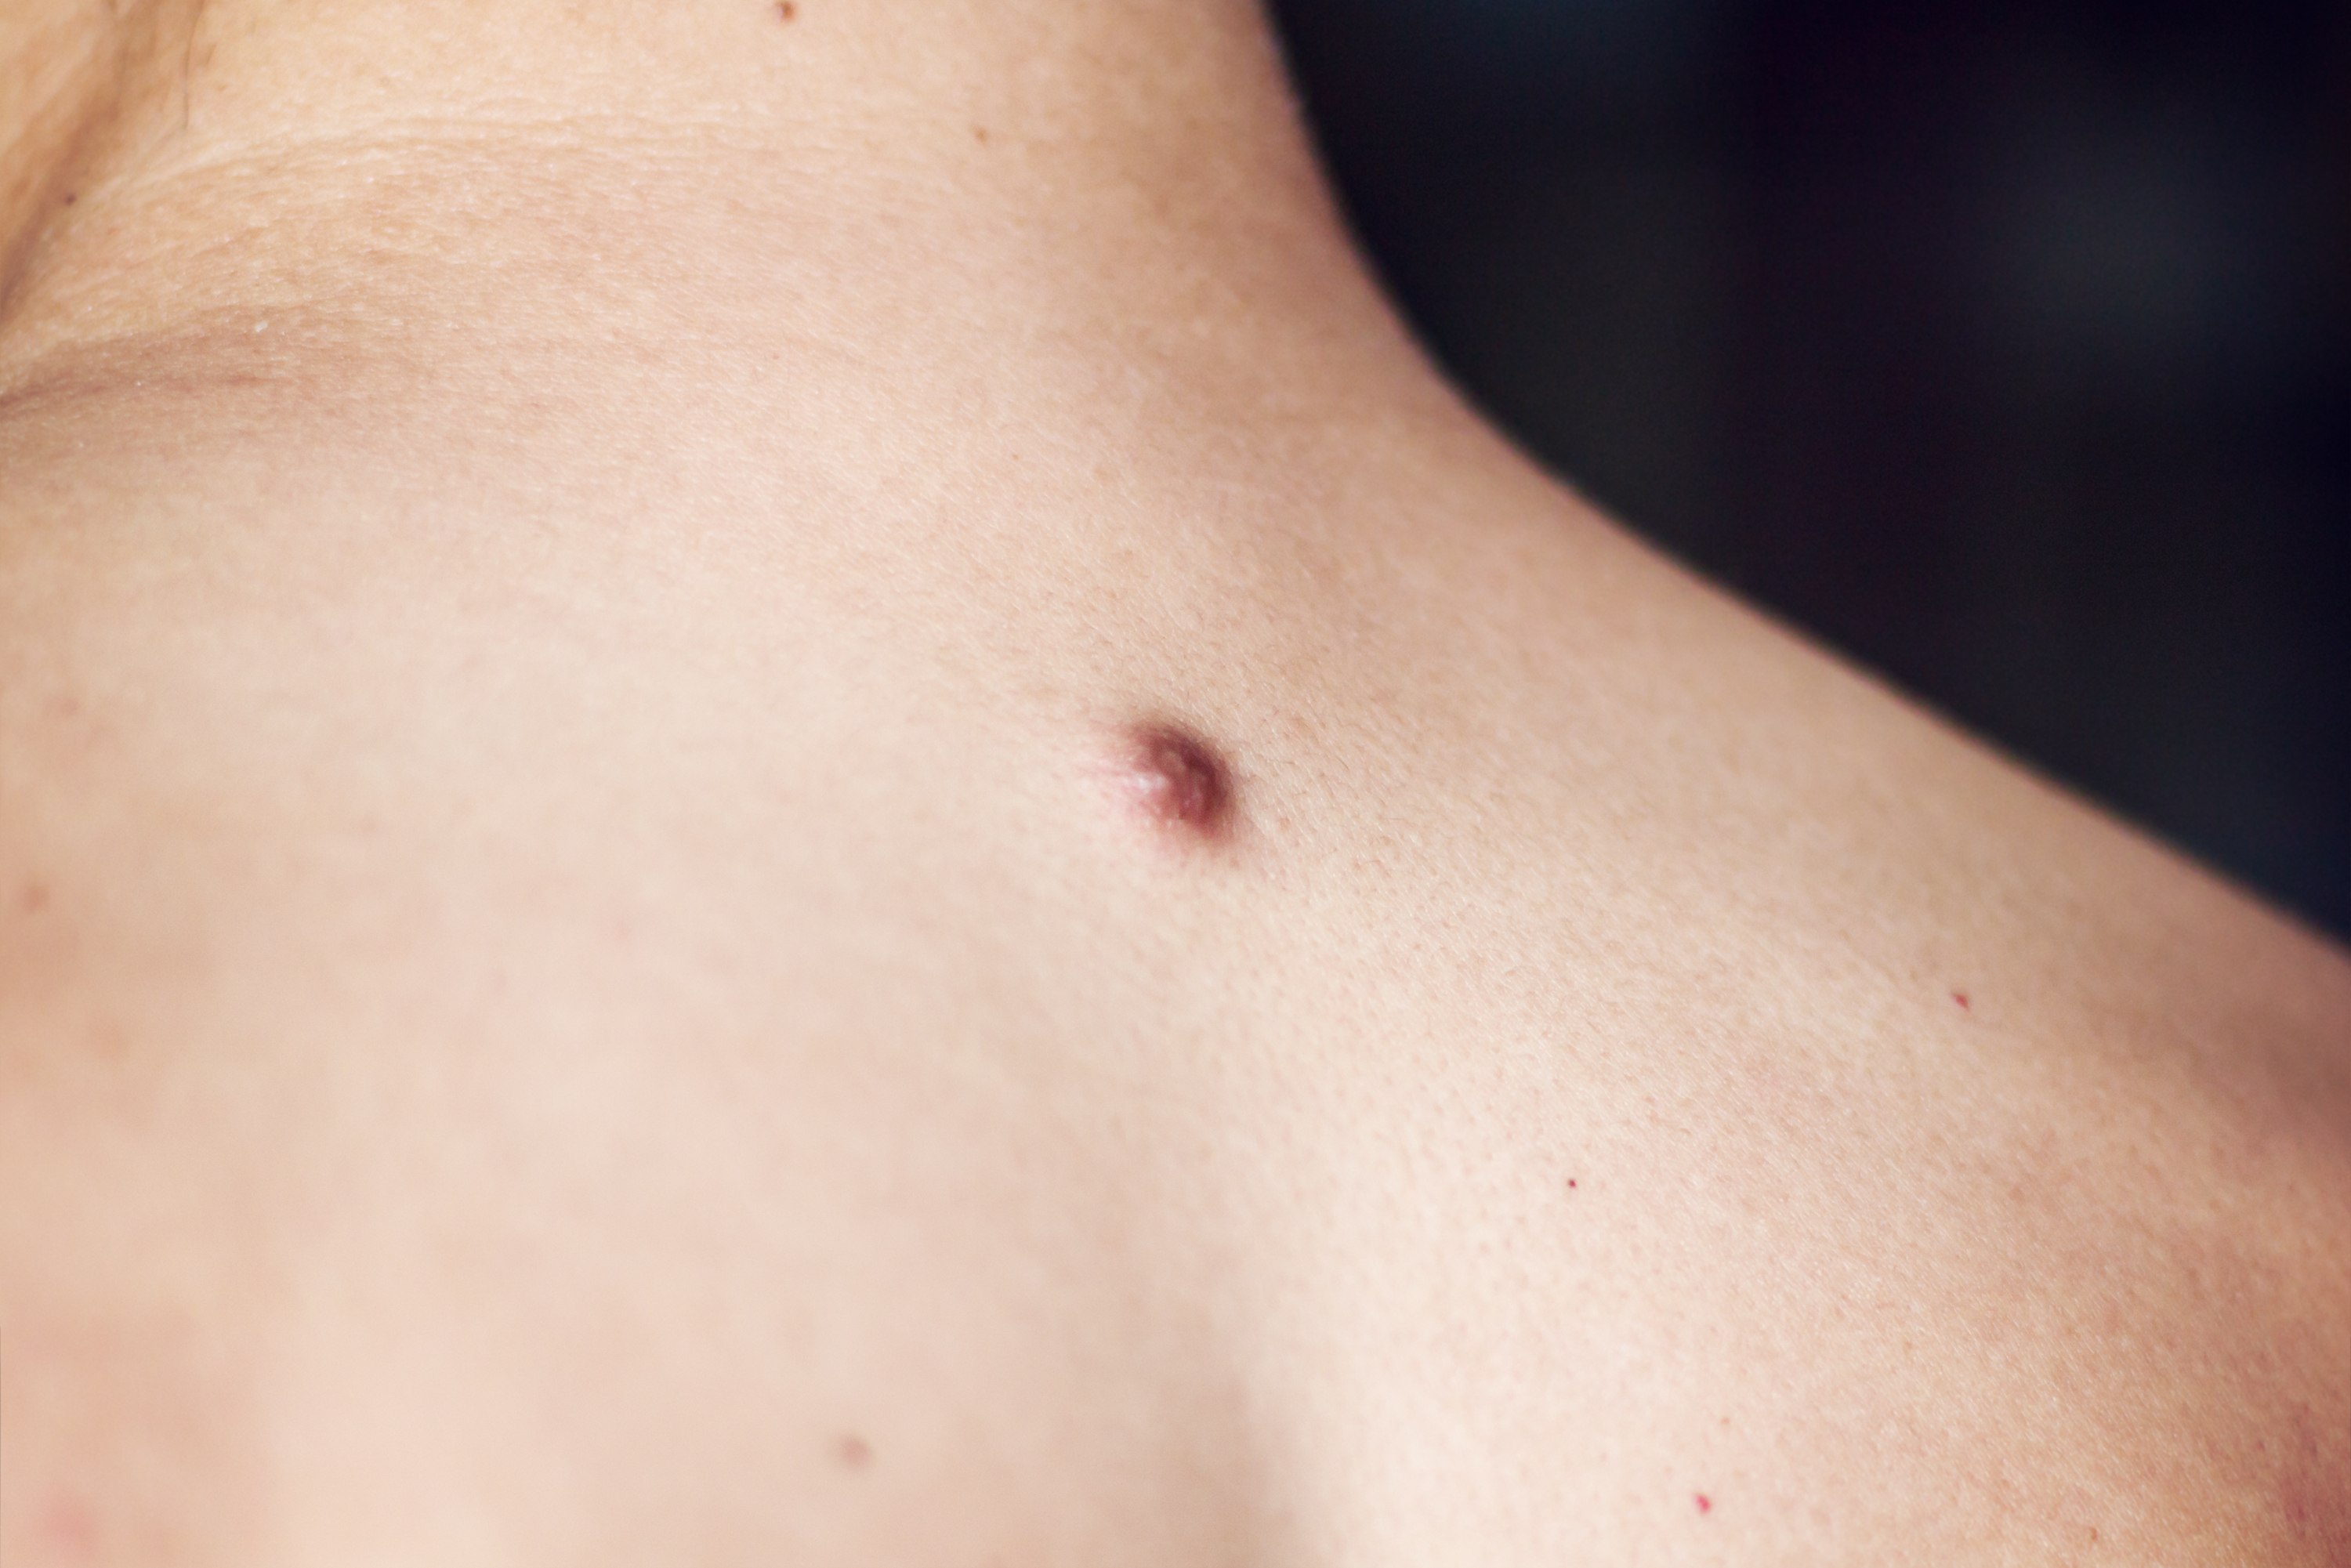 Dark pimple on the back. | Source: Shutterstock